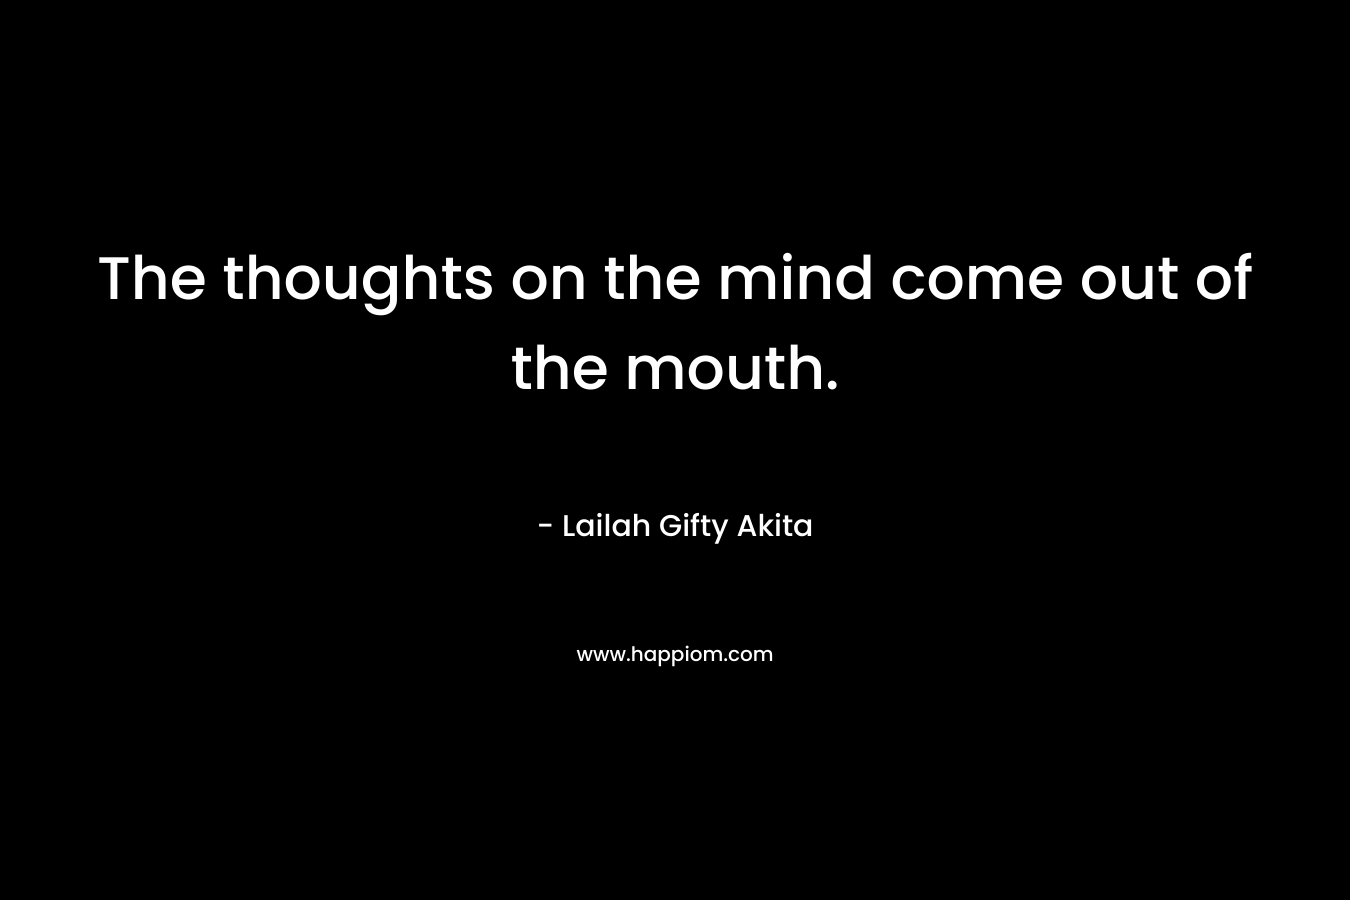 The thoughts on the mind come out of the mouth.